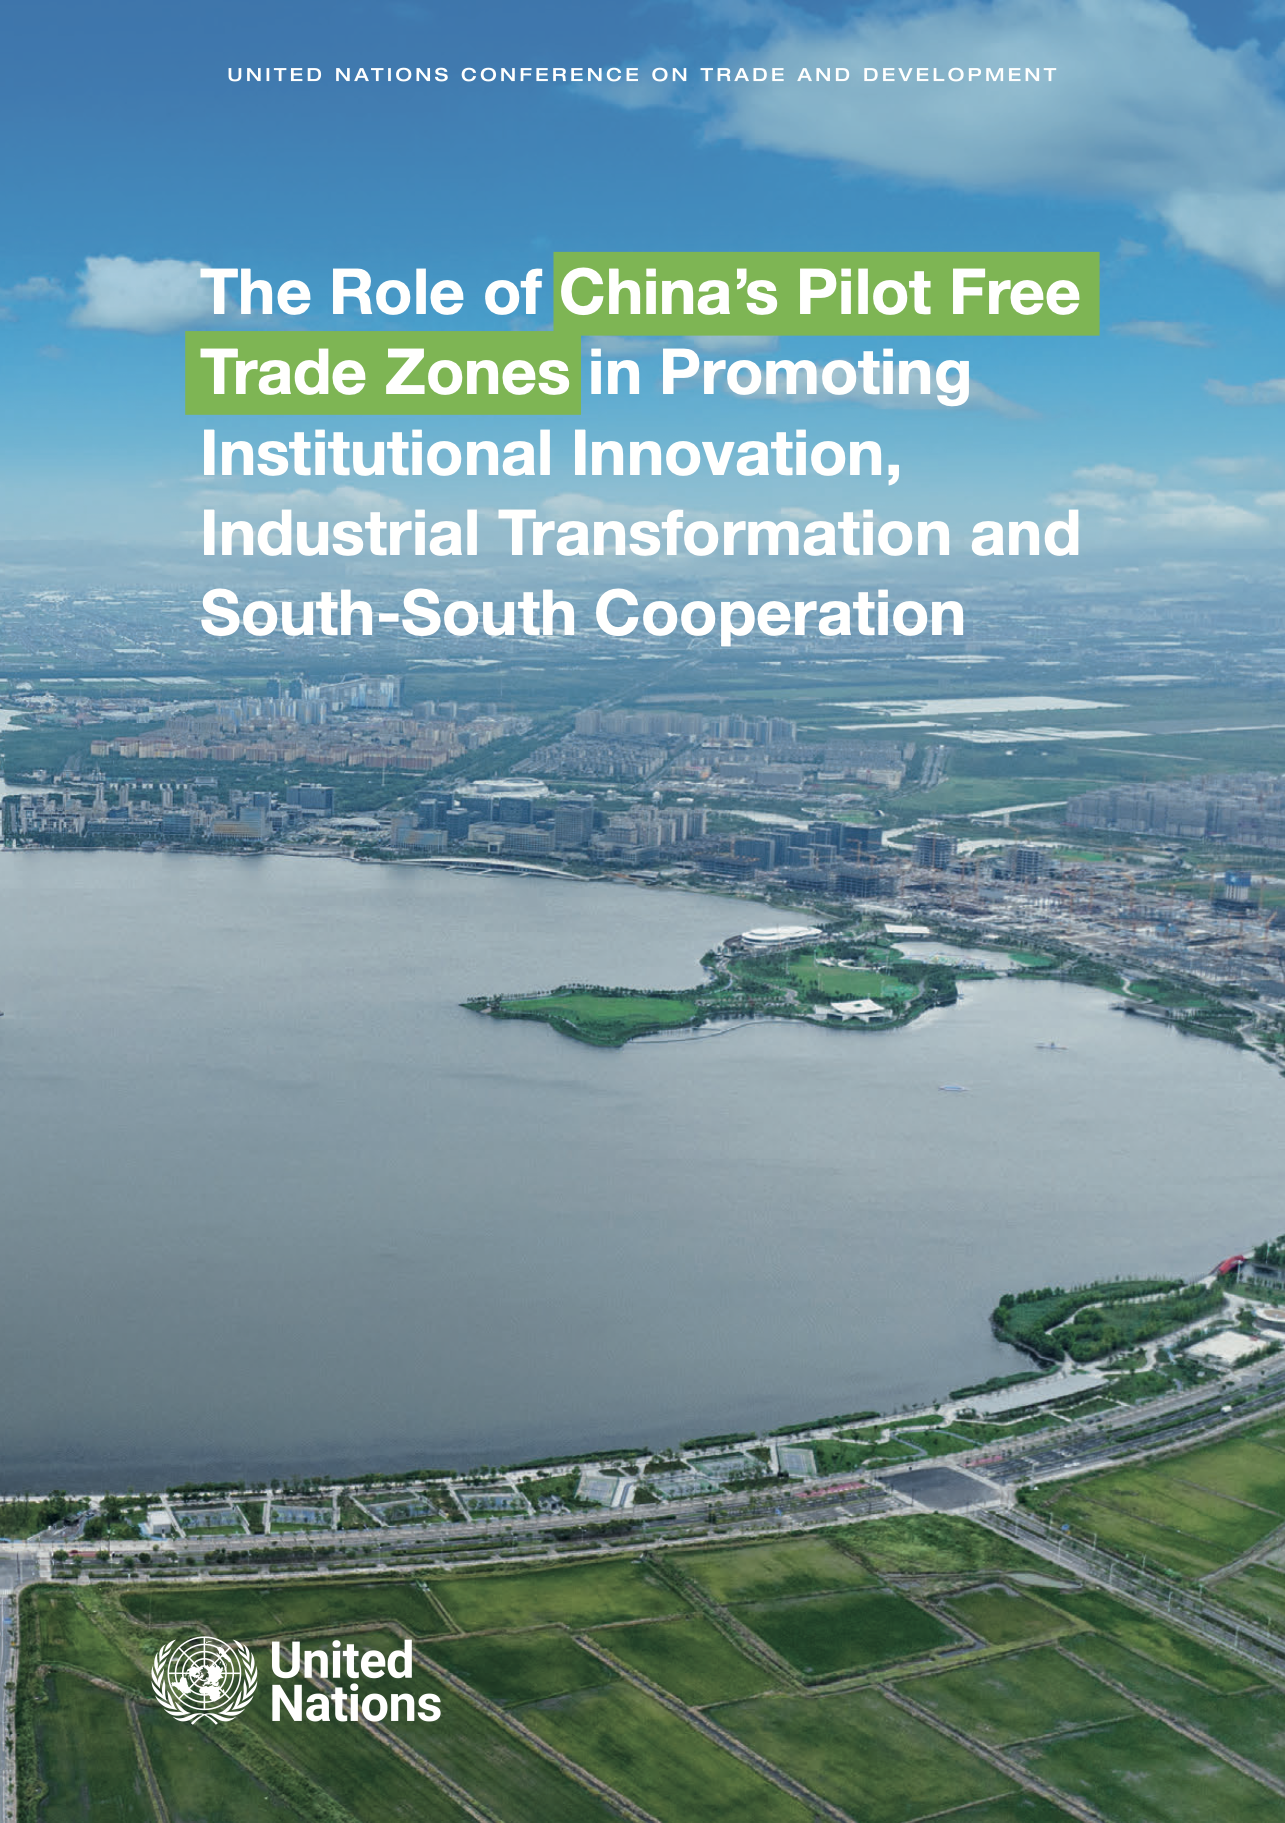 The Role of China’s Pilot Free Trade Zones in Promoting Institutional Innovation, Industrial Transformation, and South-South Cooperation (UNCTAD, 2023)